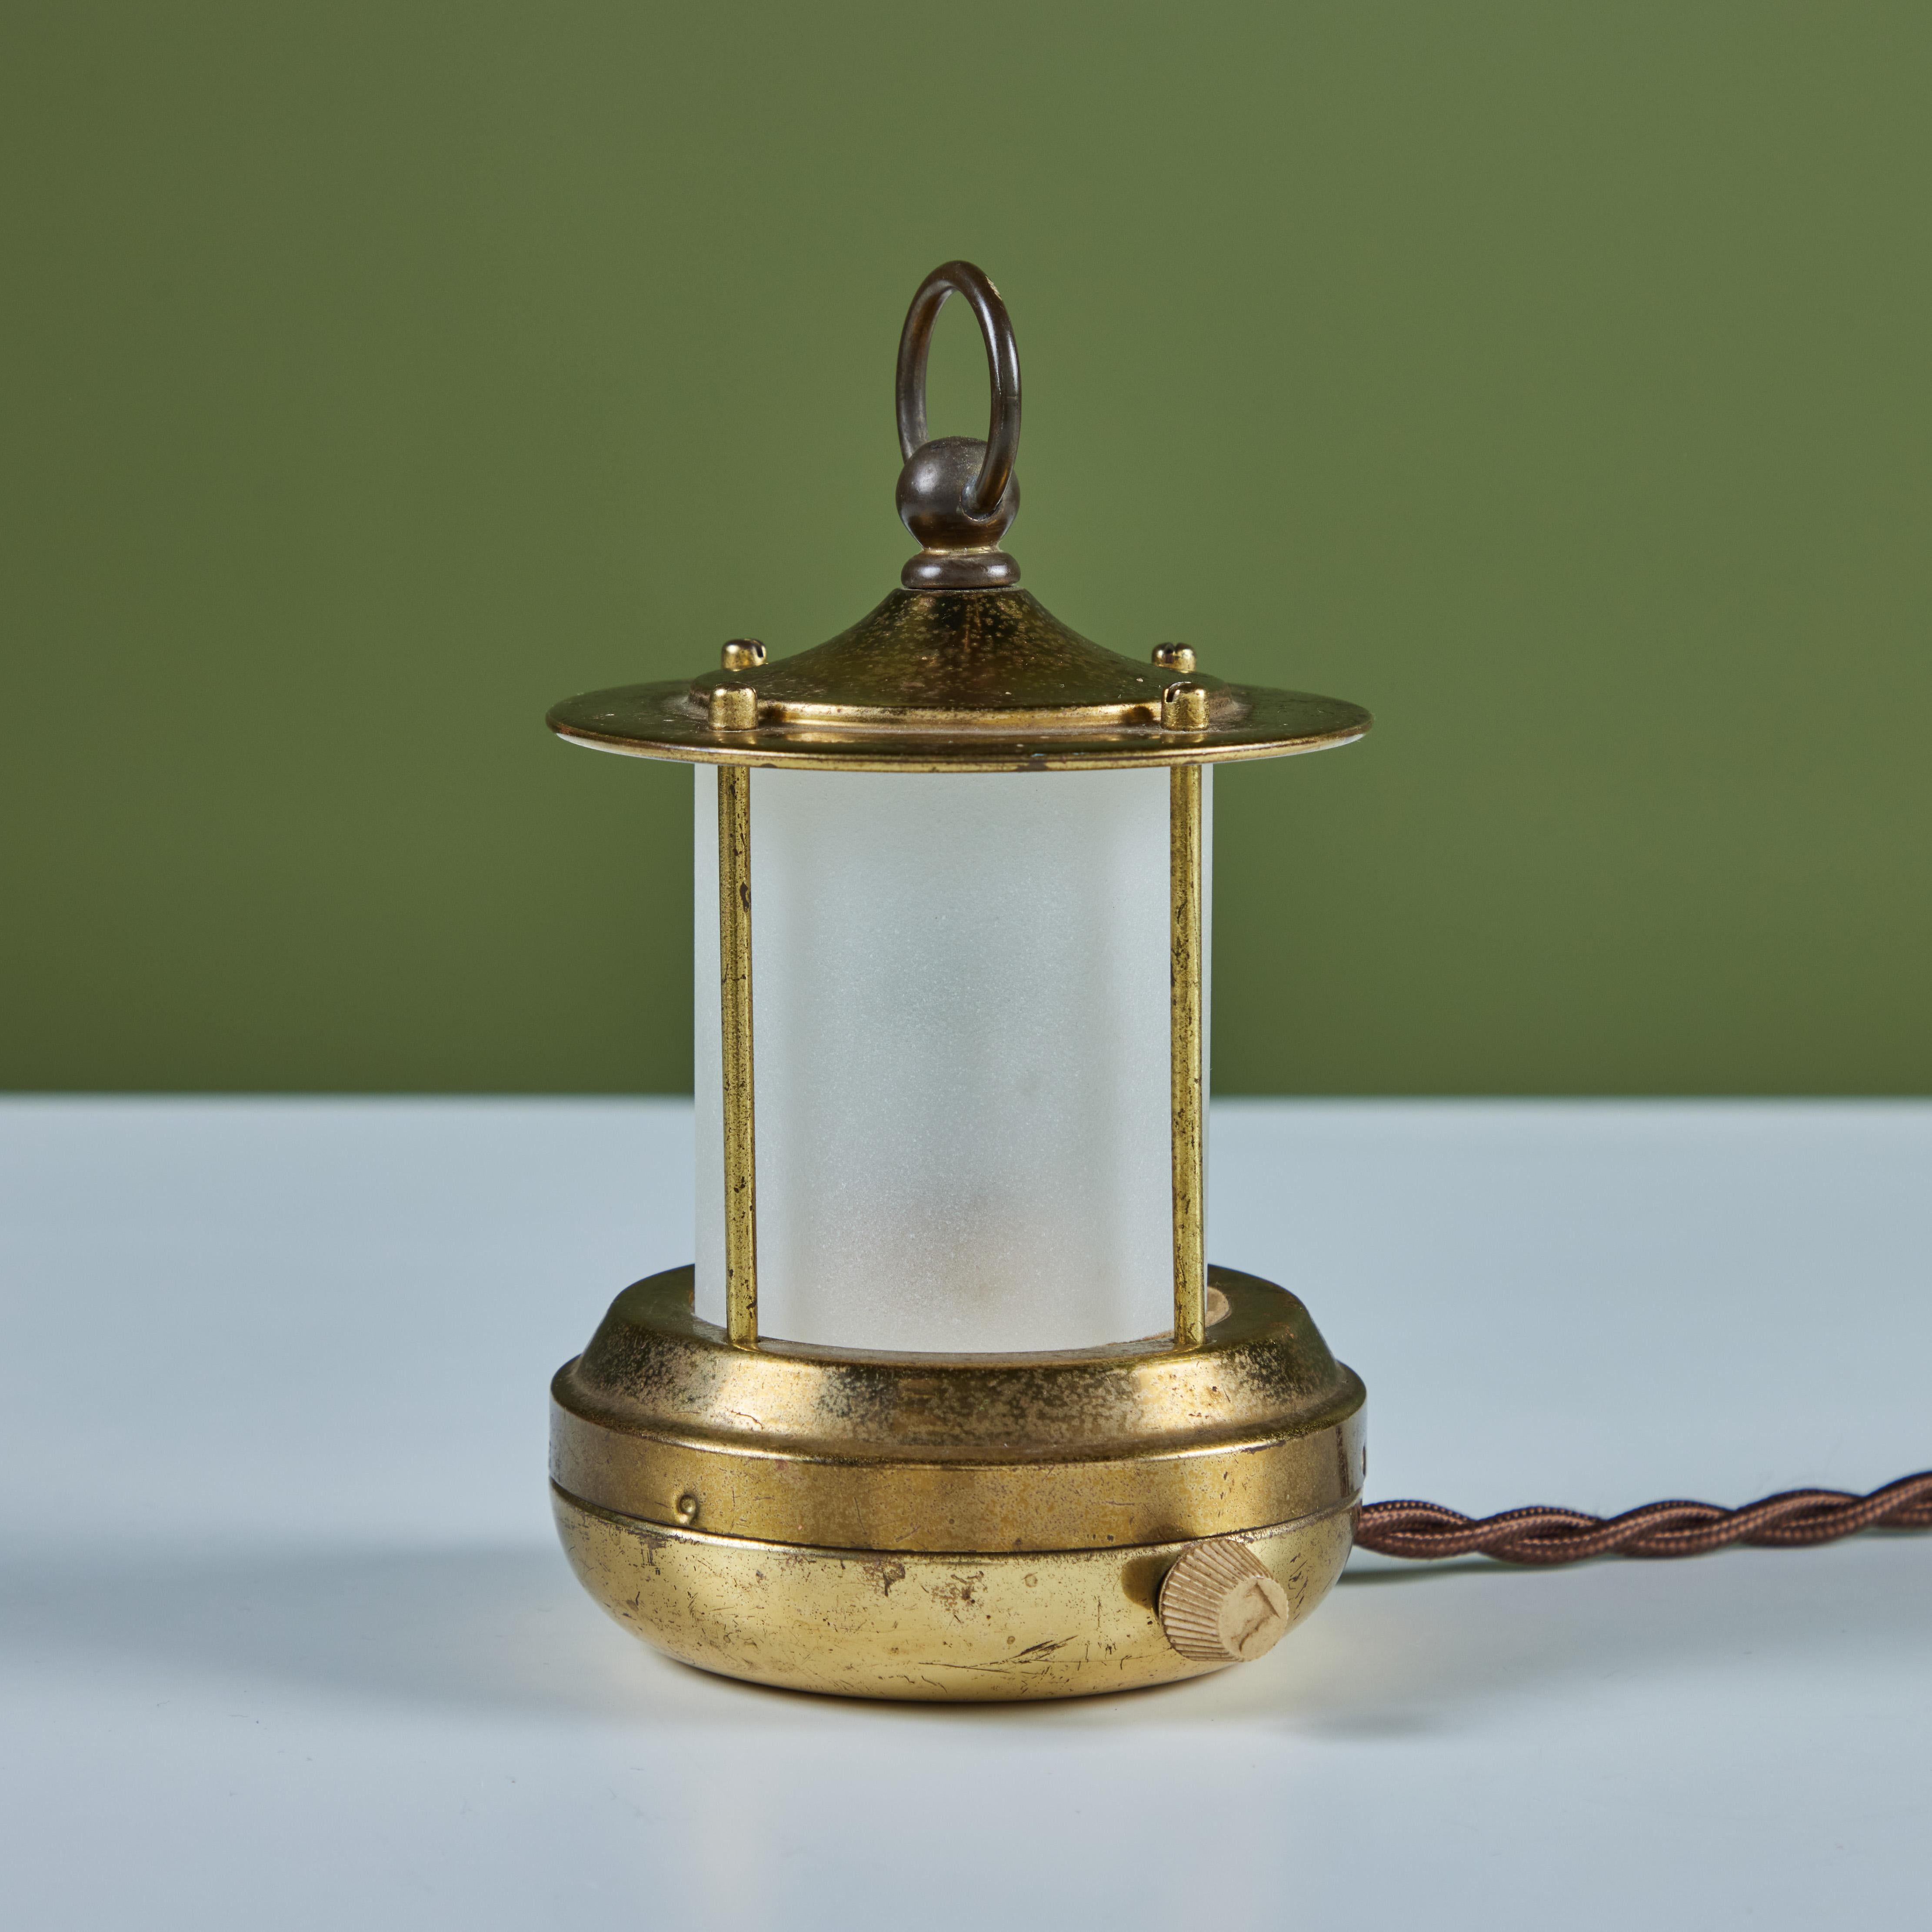 Petite brass lantern style table lamp for Chase, c.1930s, USA. The Art Deco lamp features a cylindrical cone shaped glass with a brass base and cap with handle. It has a rotary on/off switch on the base and has been professionally rewired. 